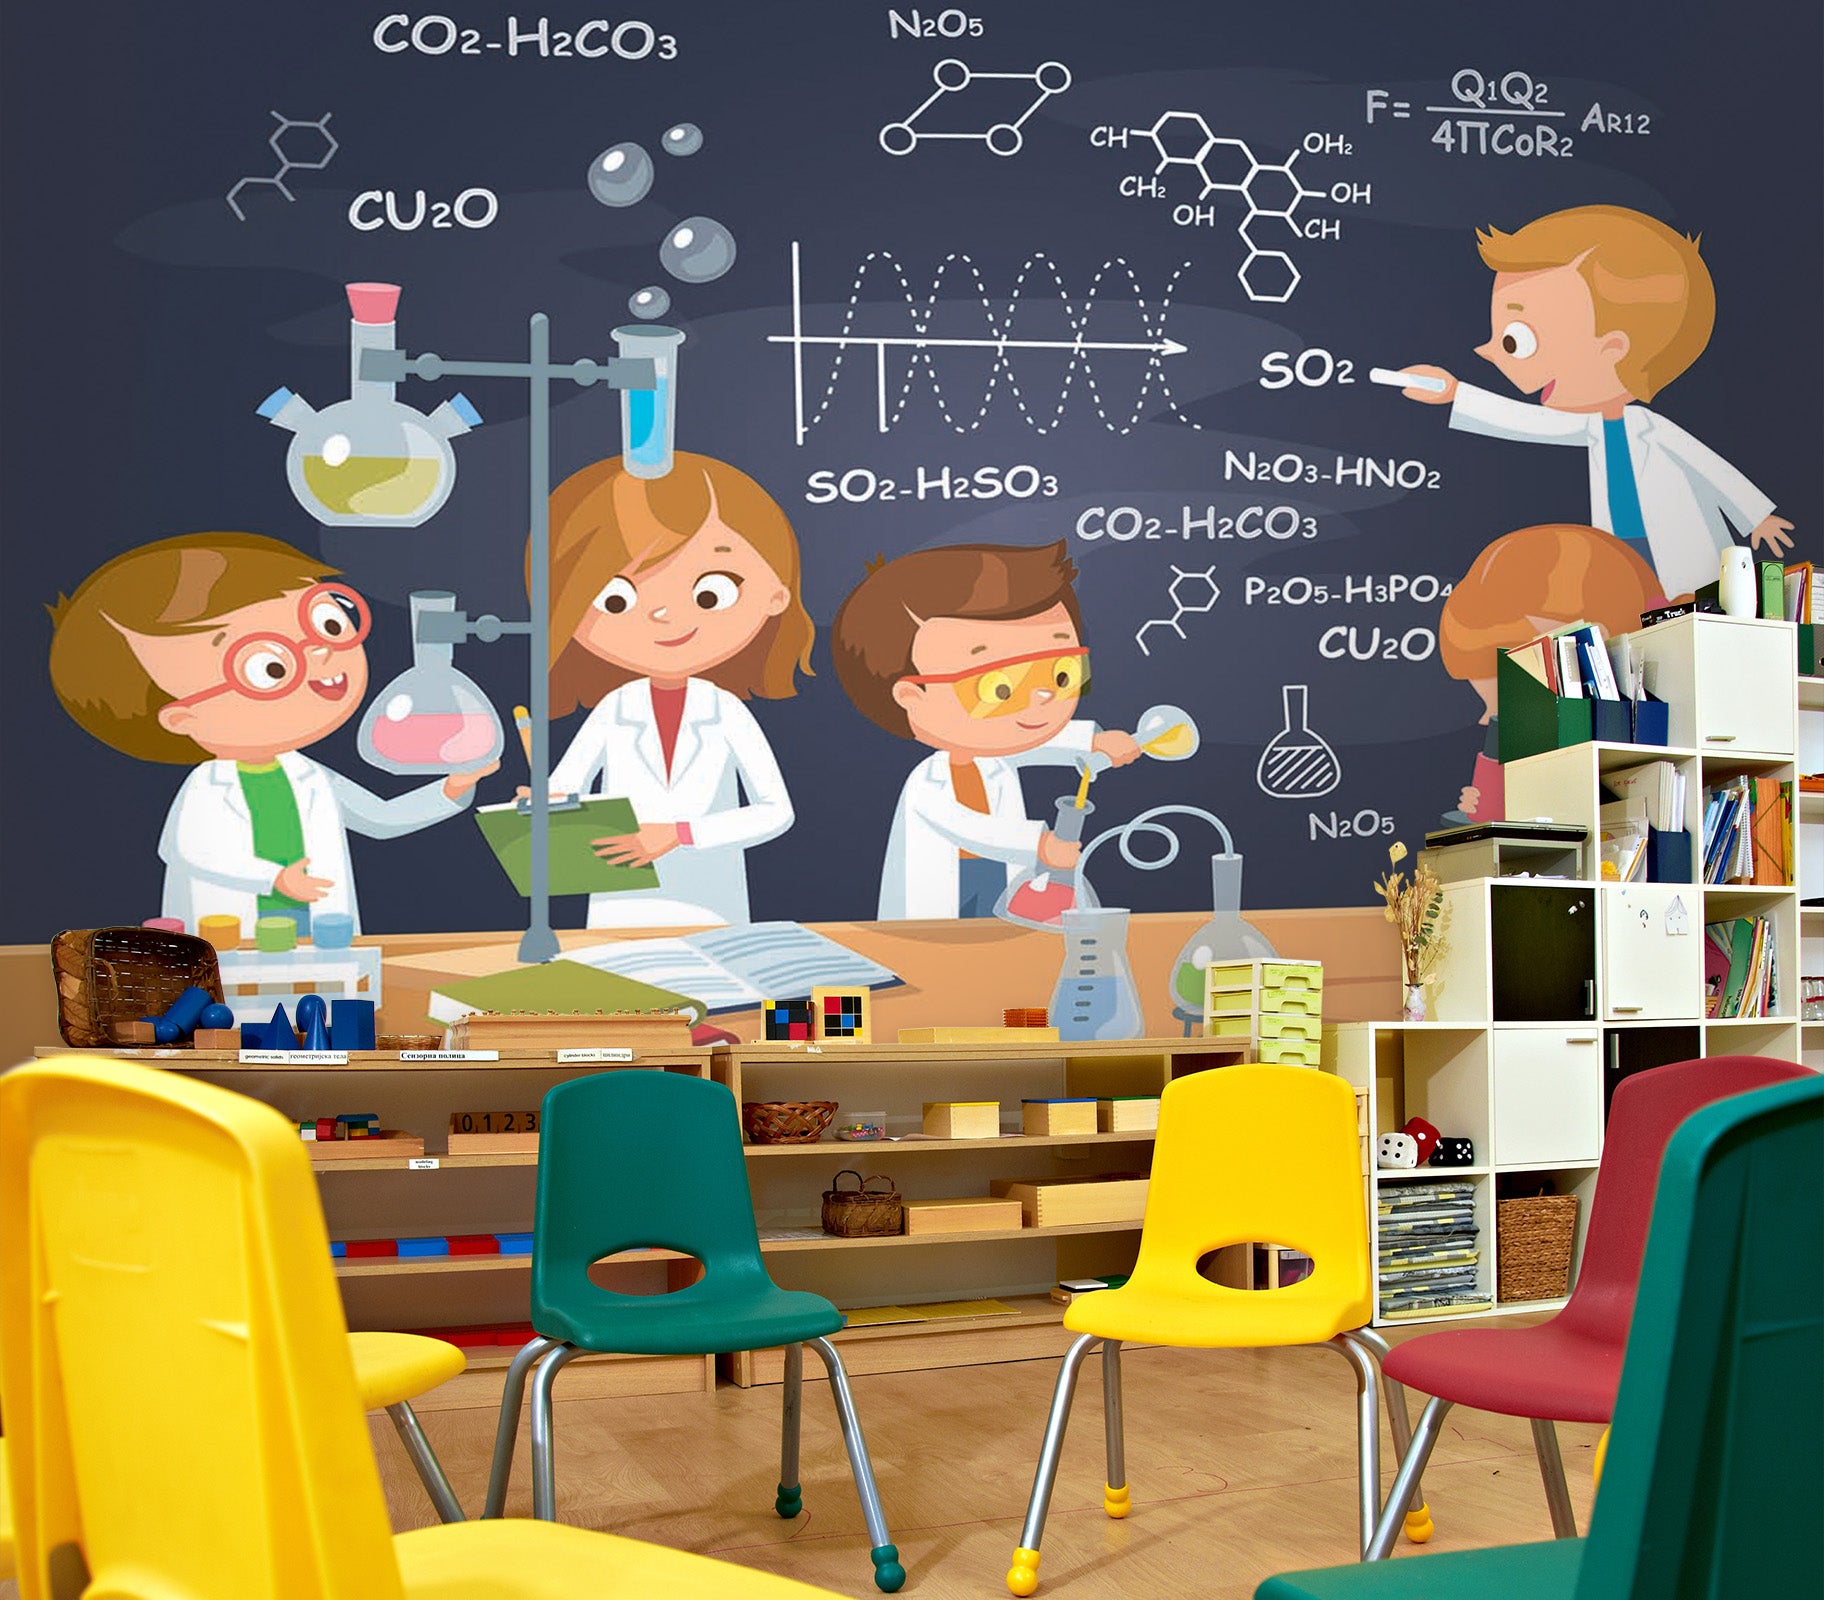 3D Chemical Reagent 176 Wall Murals